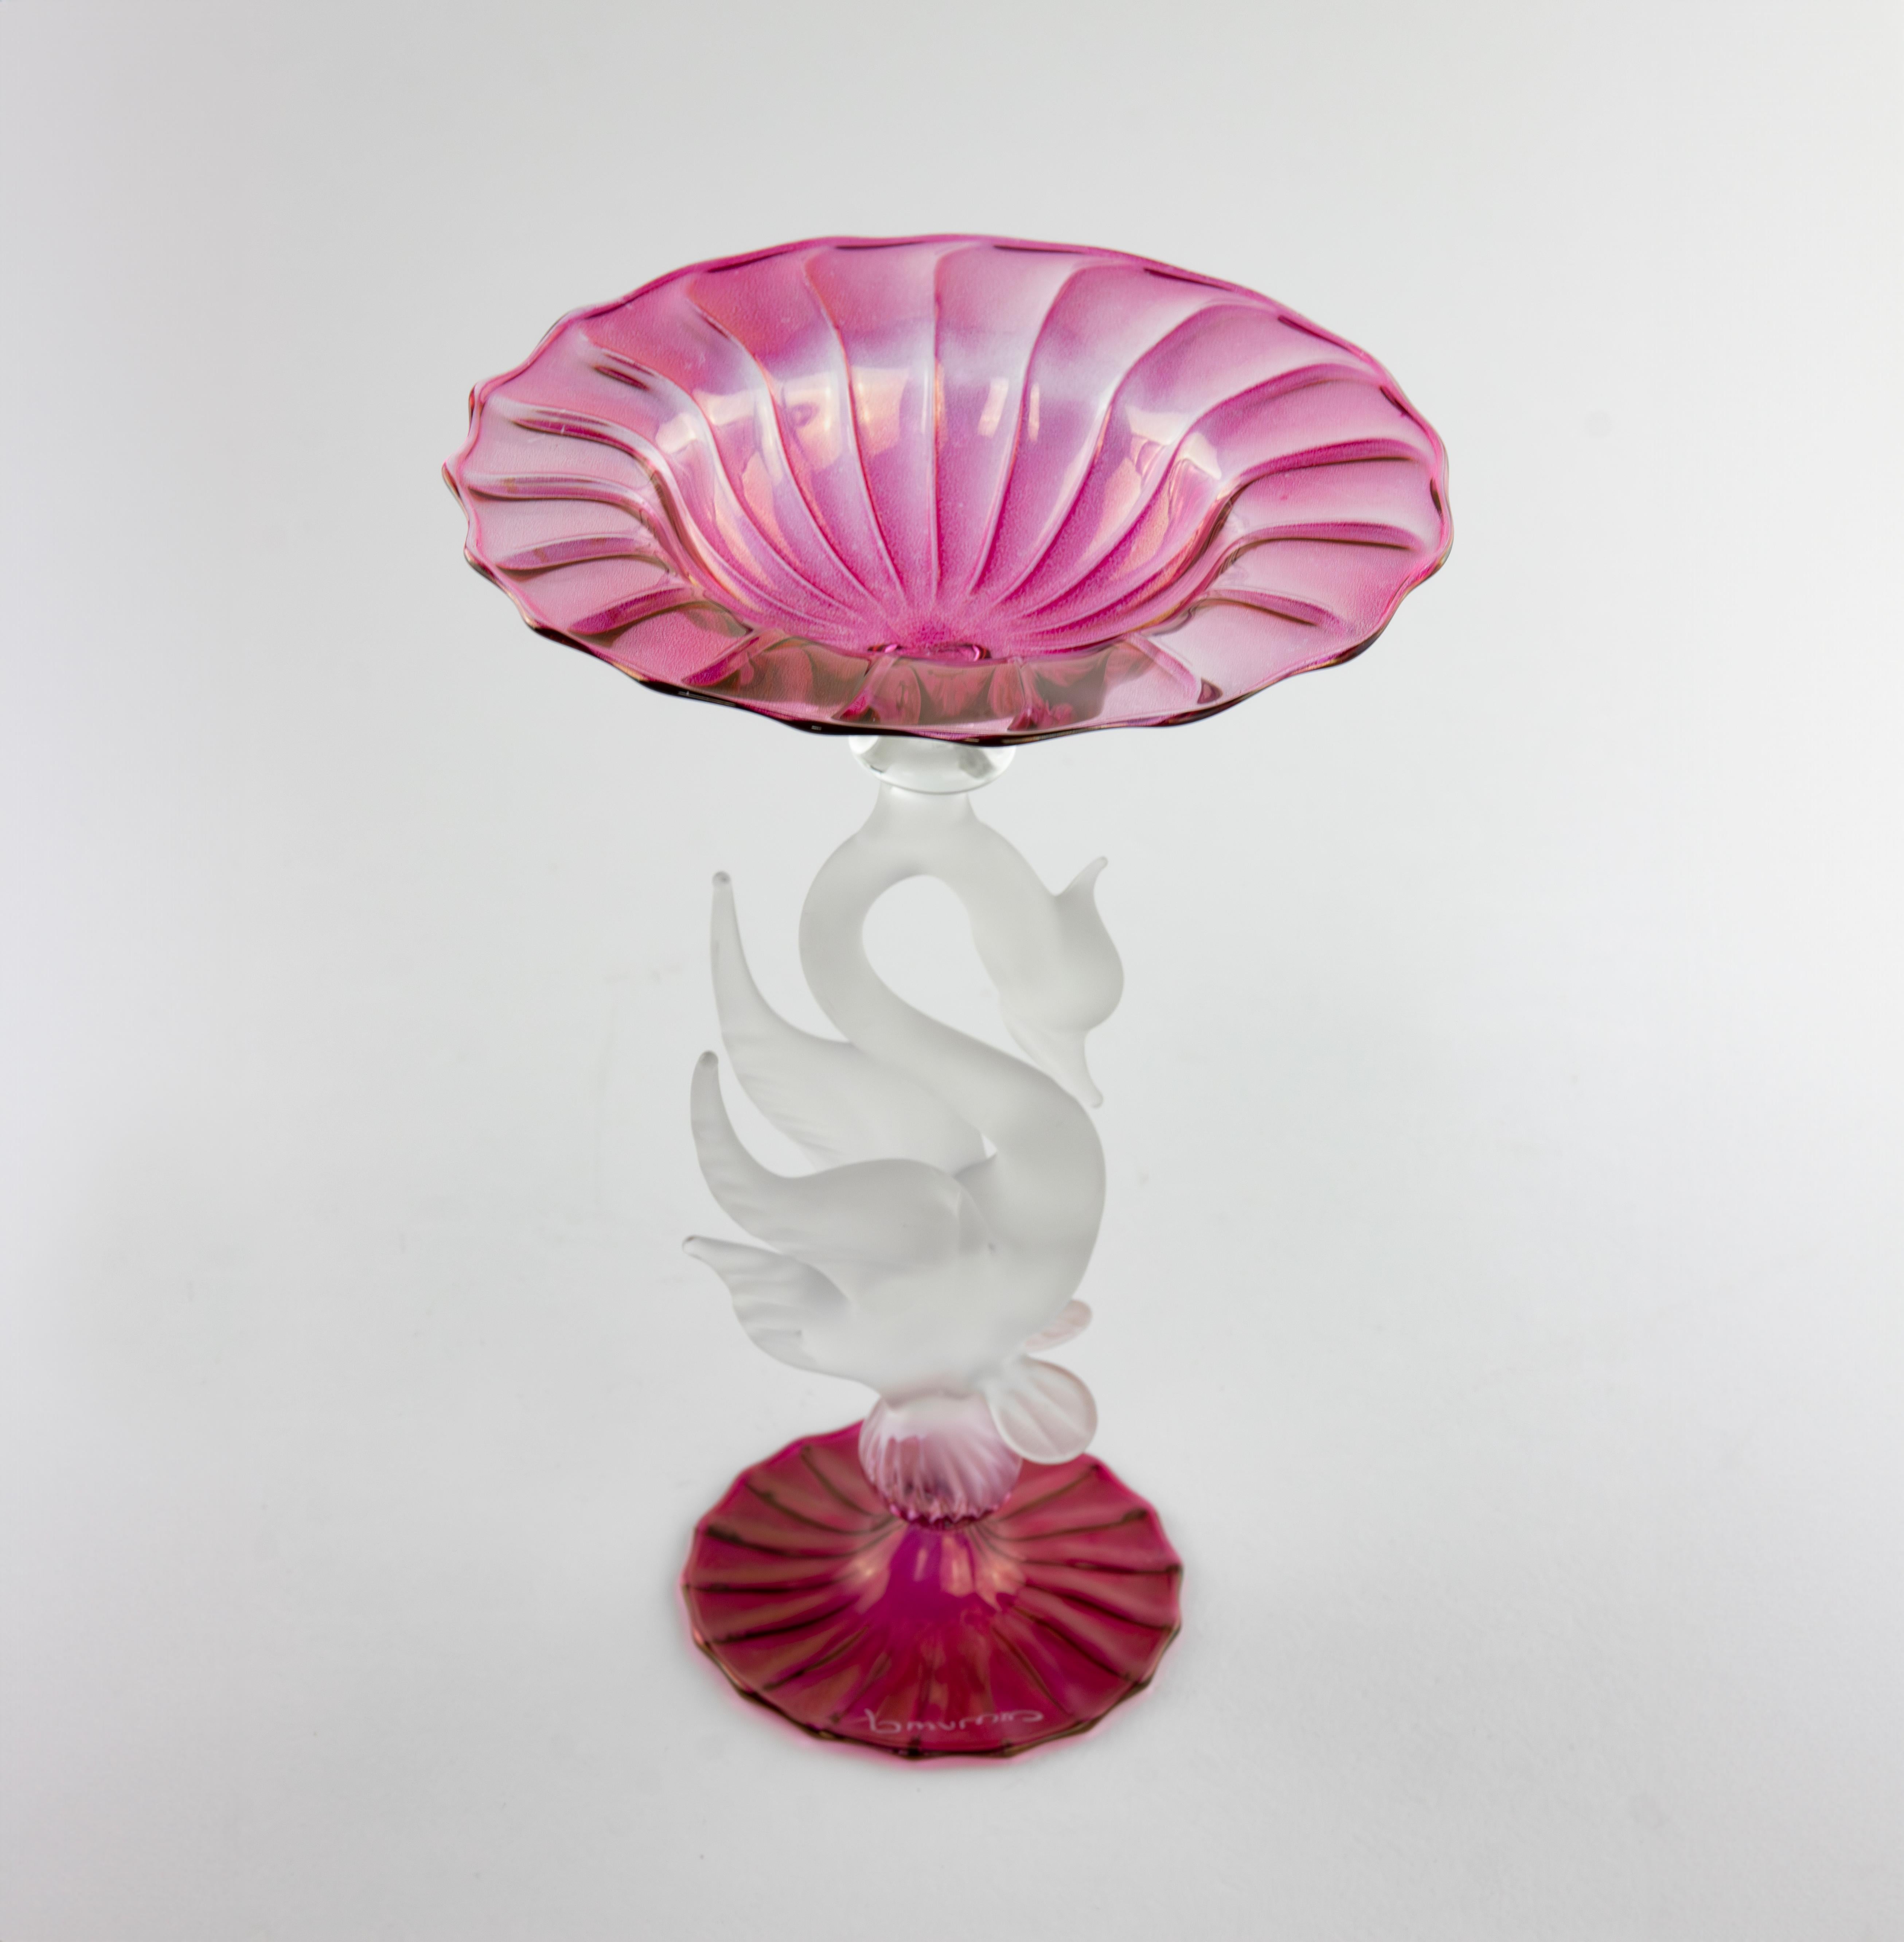 Murano glass cake stand with swan-shaped stem, Italy 1980s.

Designed by La Murrina.

22.5 x 15 cm.

Good condition.